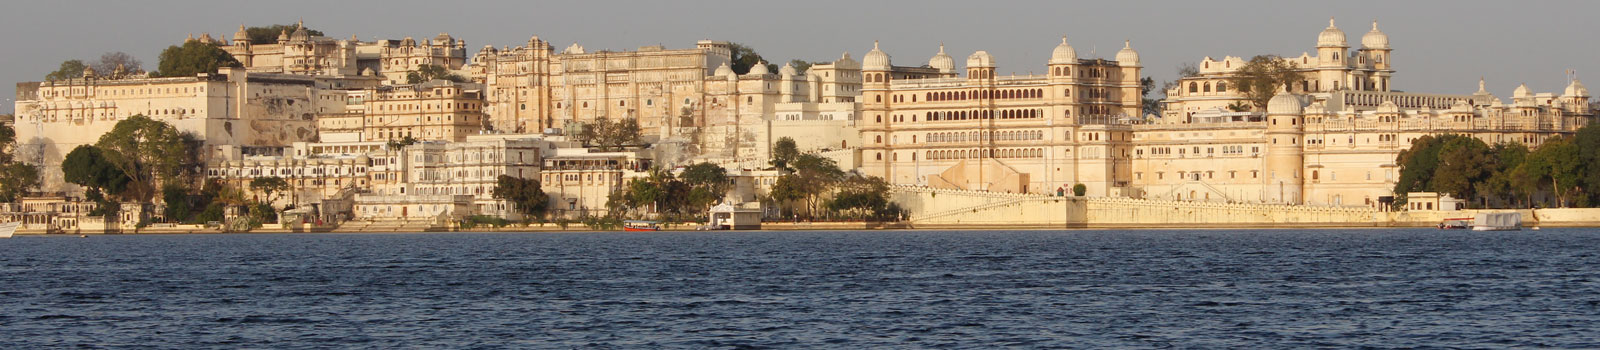 Things to do in udaipur